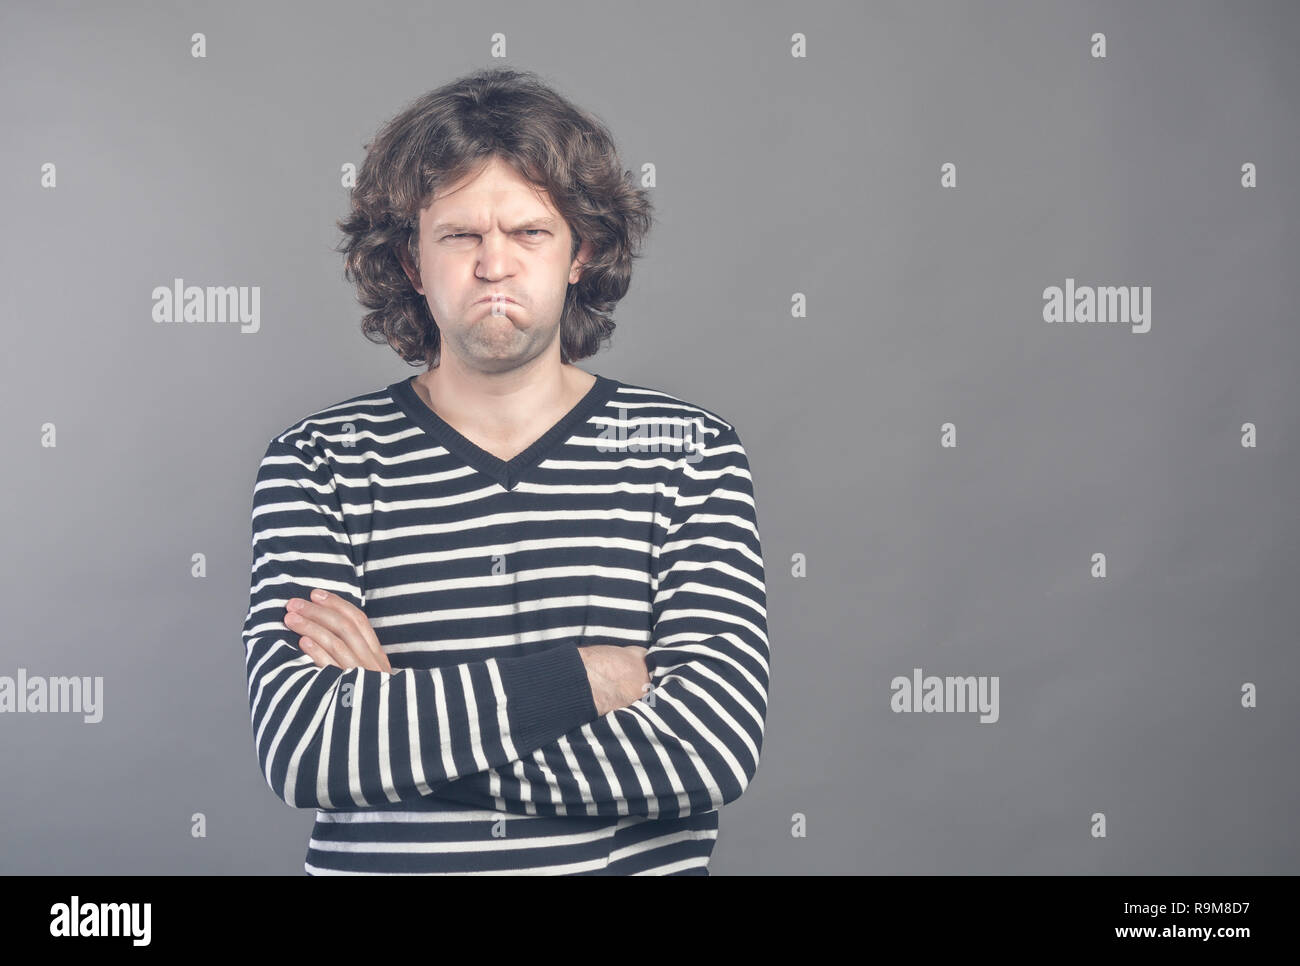 Angry young man in striped sweater puffed up his cheeks and crossed arms about to have nervous breakdown, isolated on gray wall background. Negative h Stock Photo